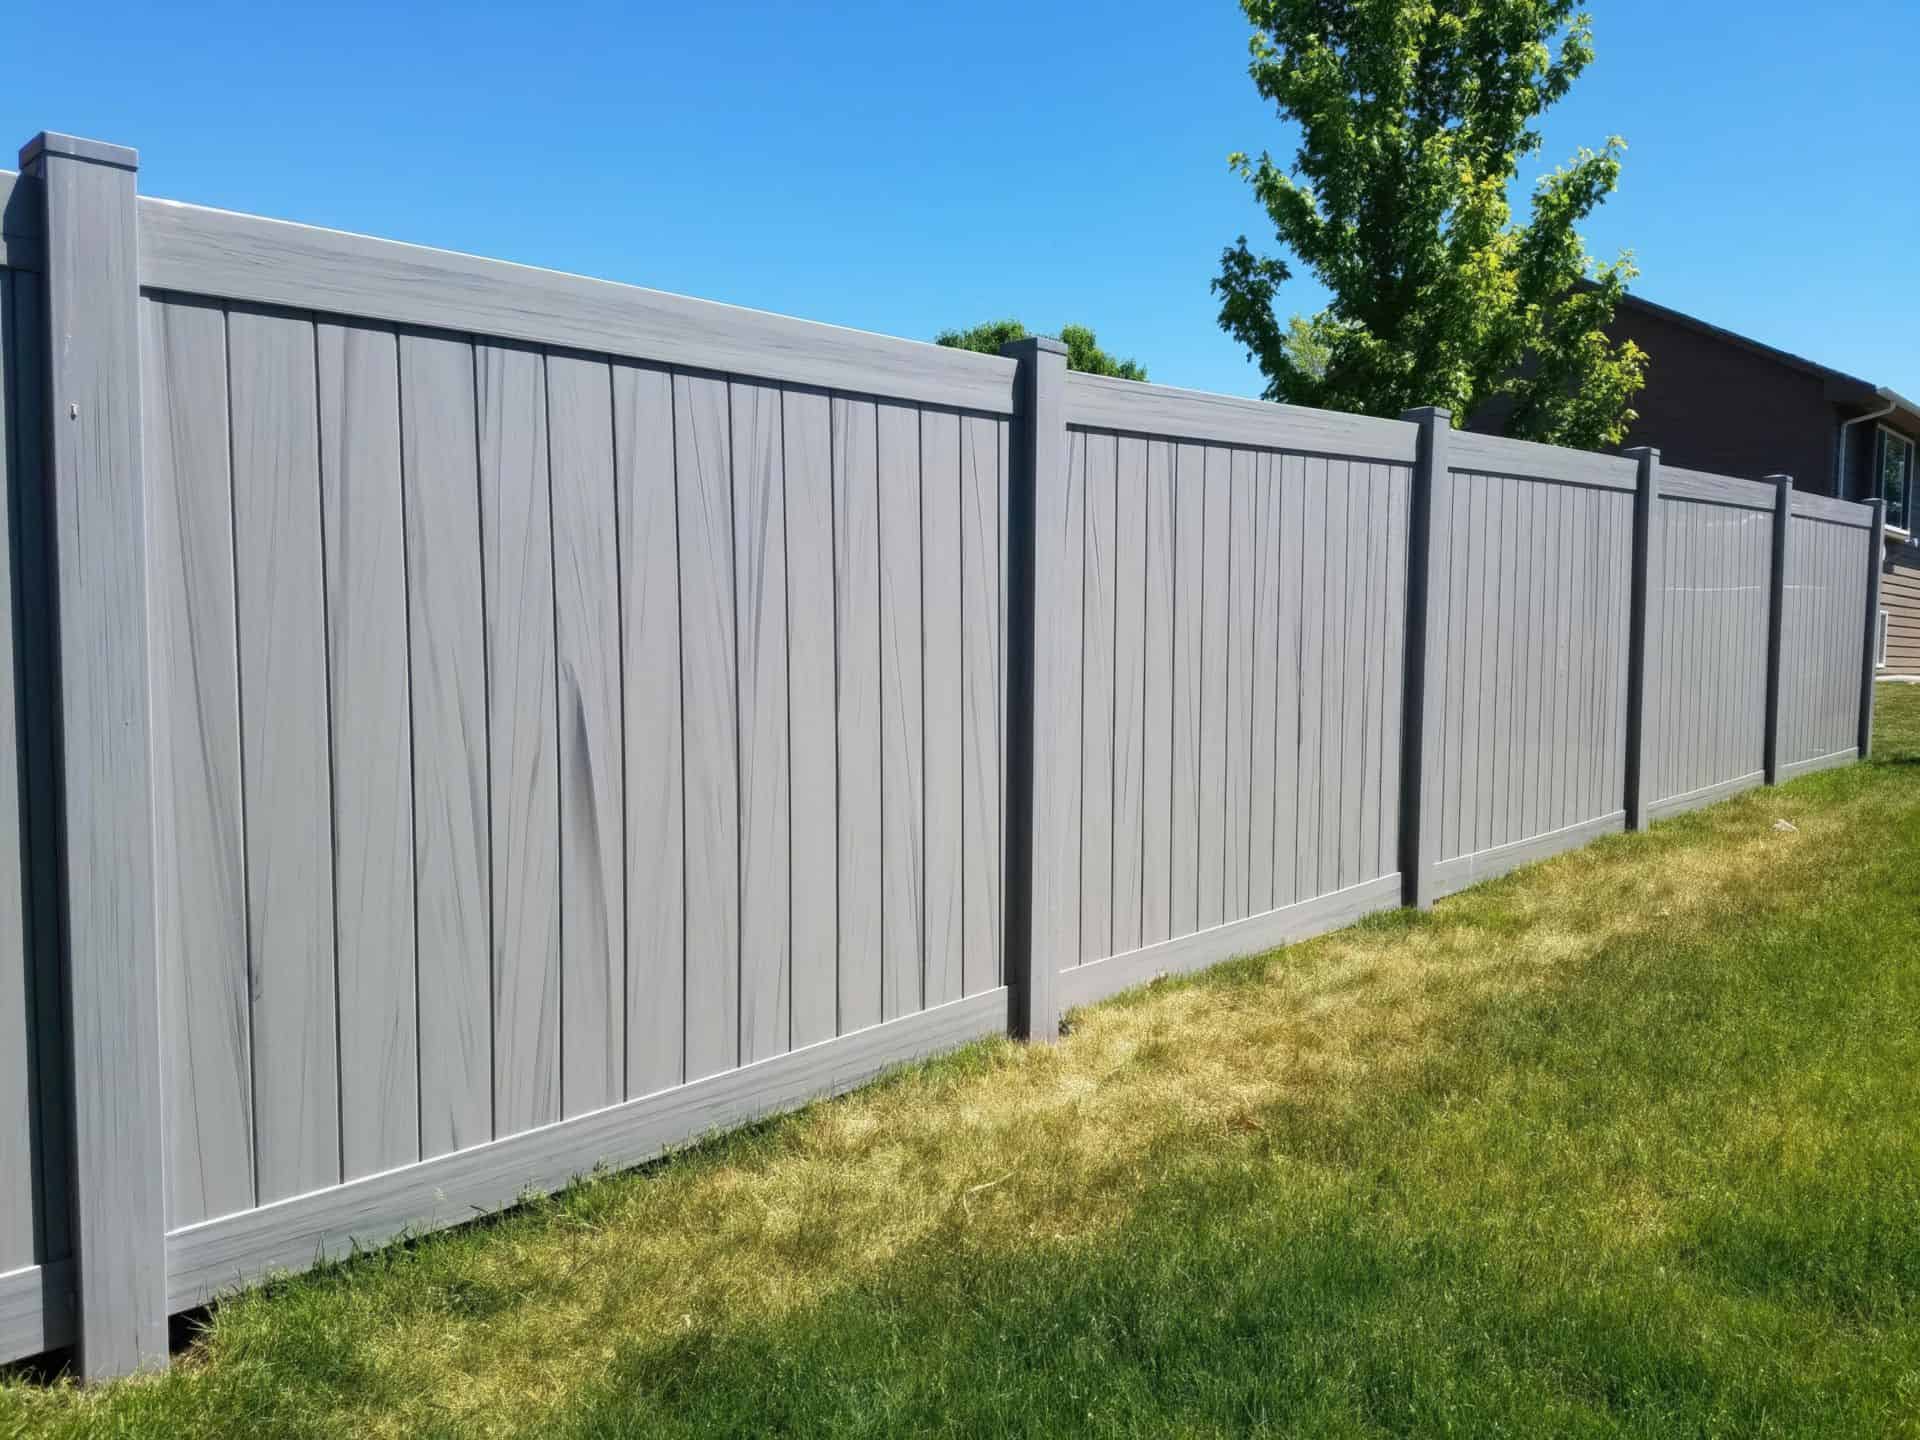 Vinyl coastal cedar colored fence in front of a grassy lawn and the with a large tree and blue sky in the background